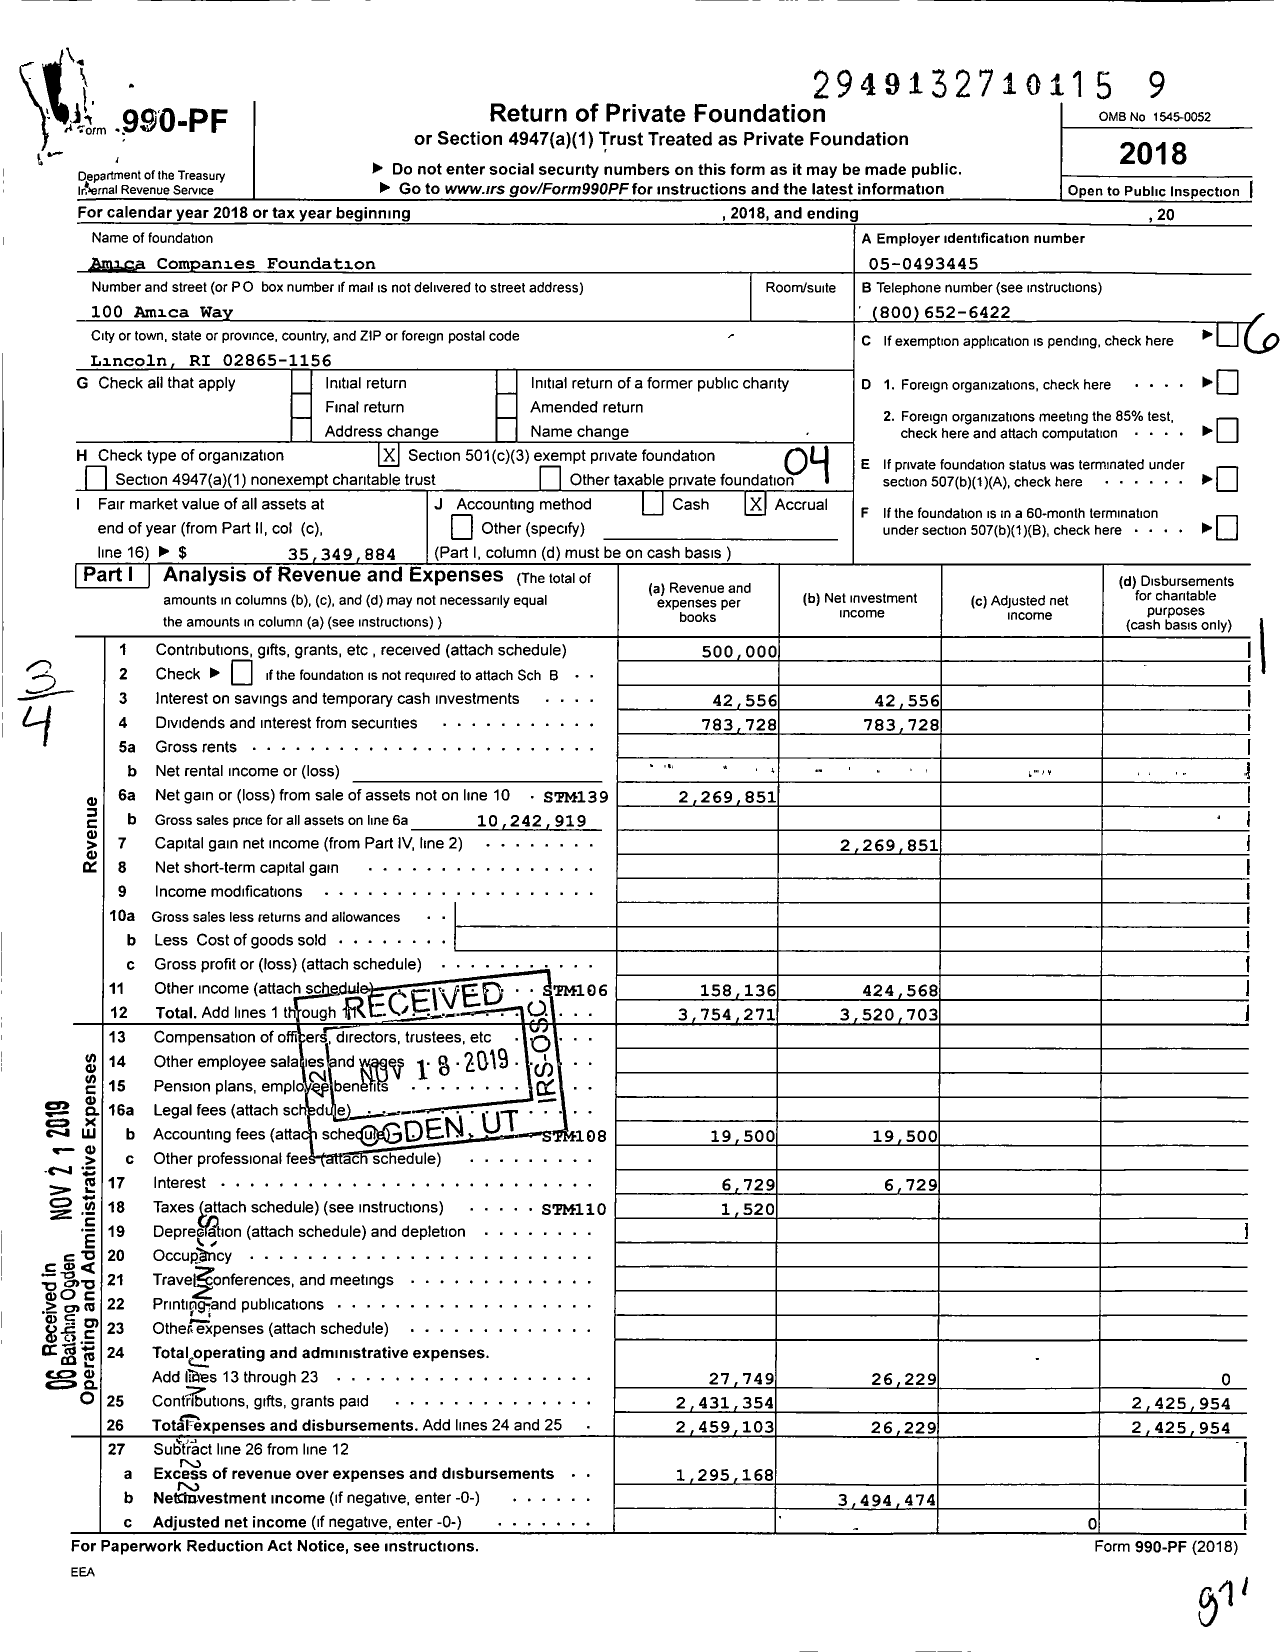 Image of first page of 2018 Form 990PF for Amica Companies Foundation